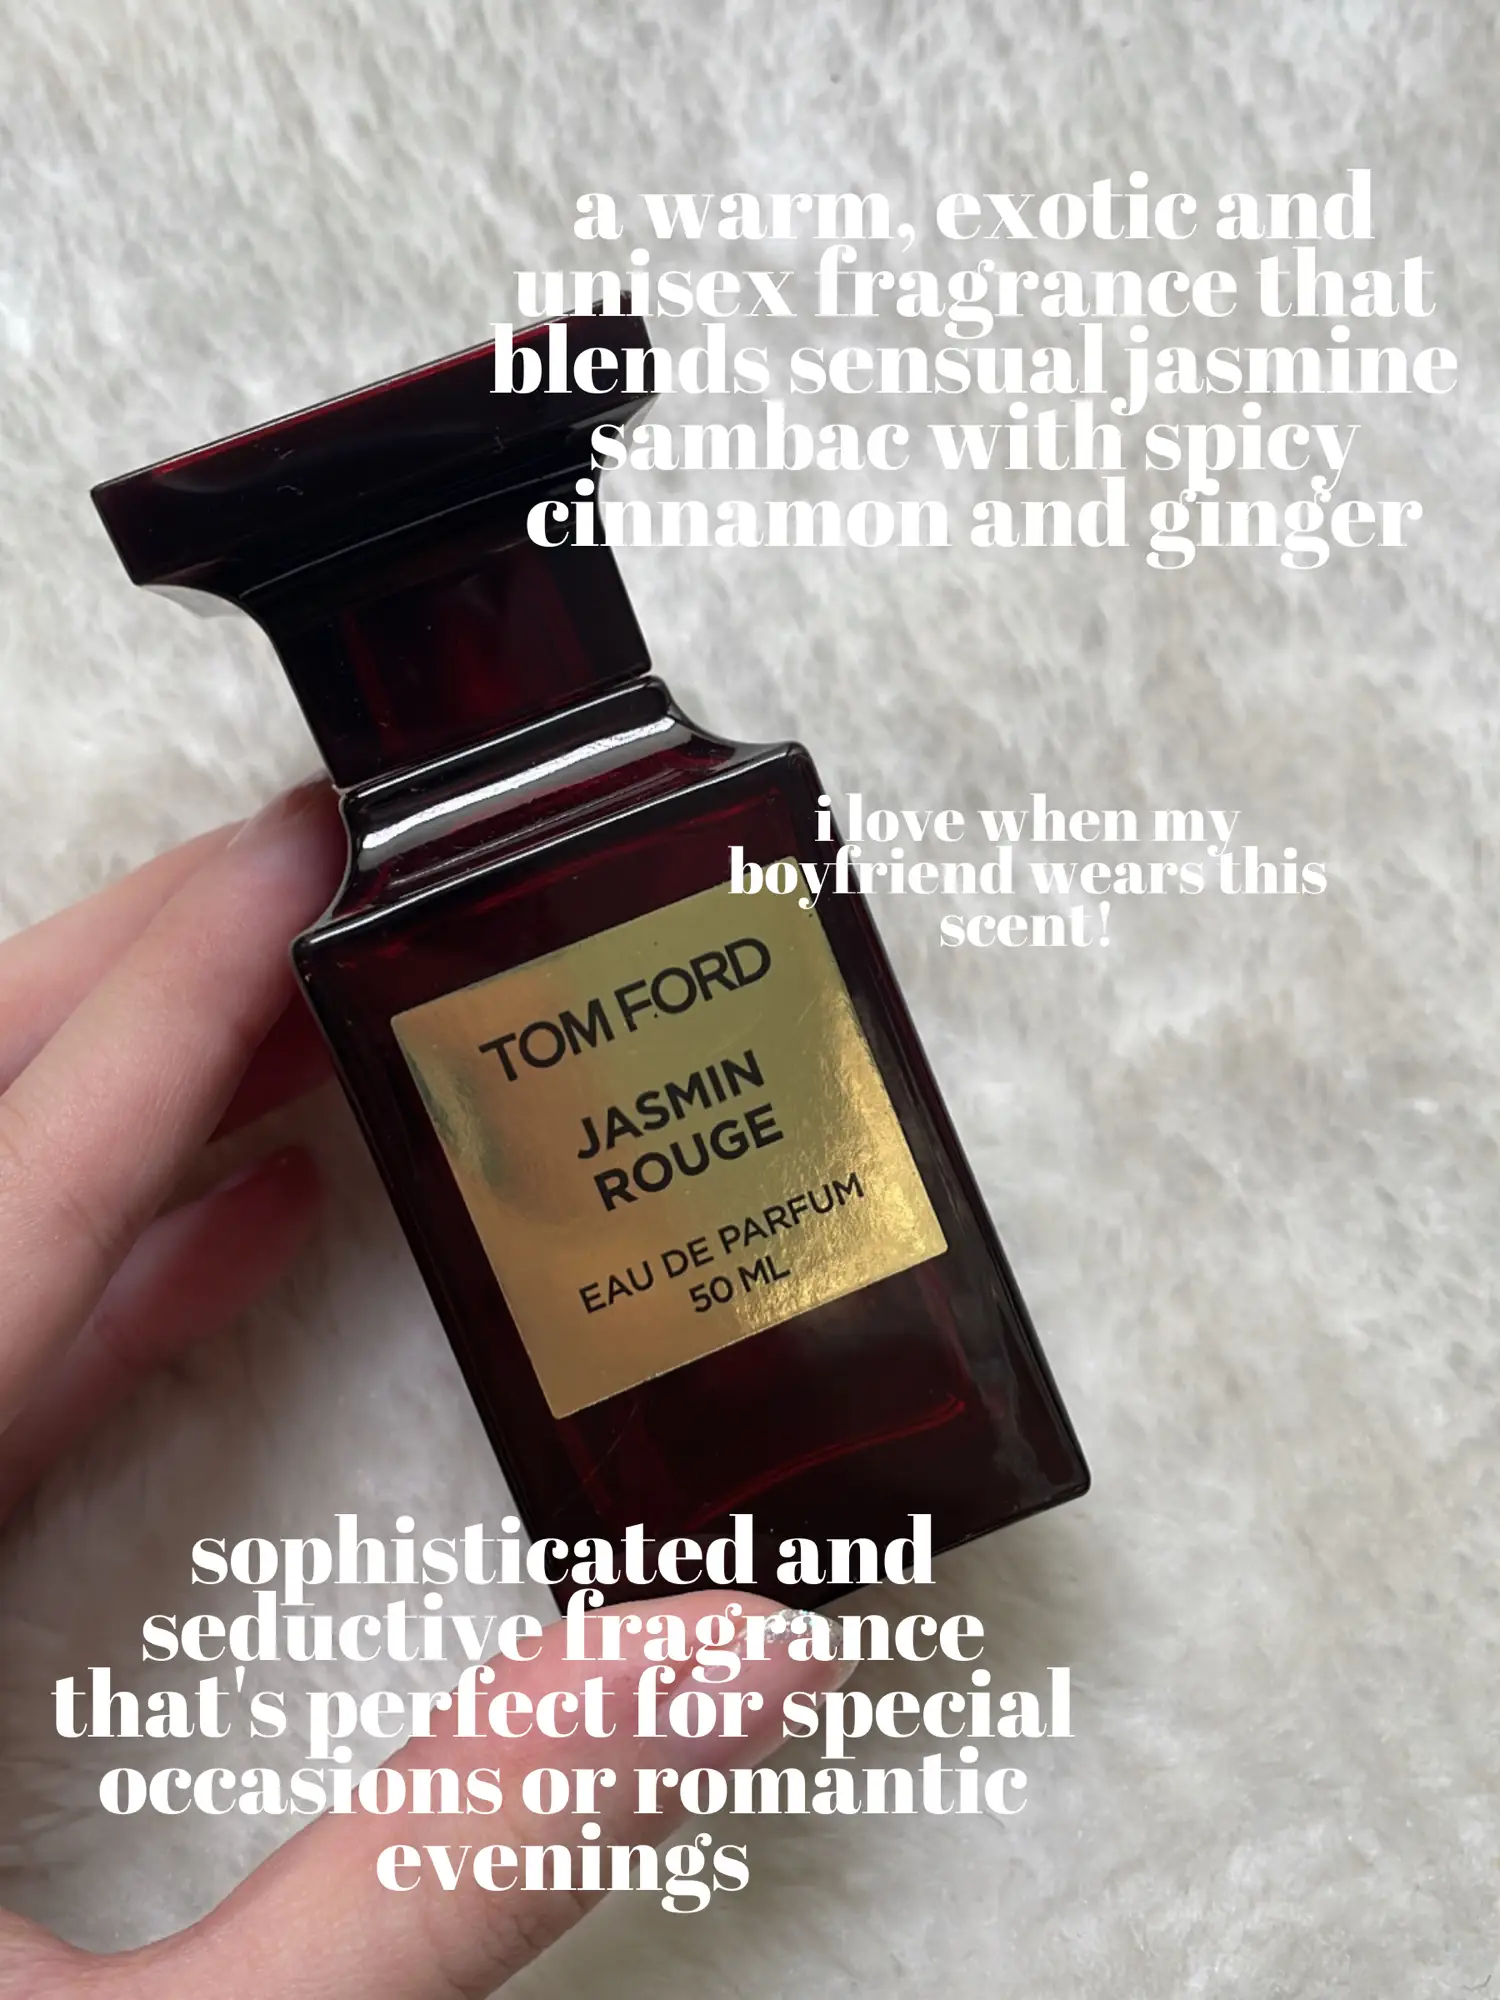 What is Tom Ford worth?